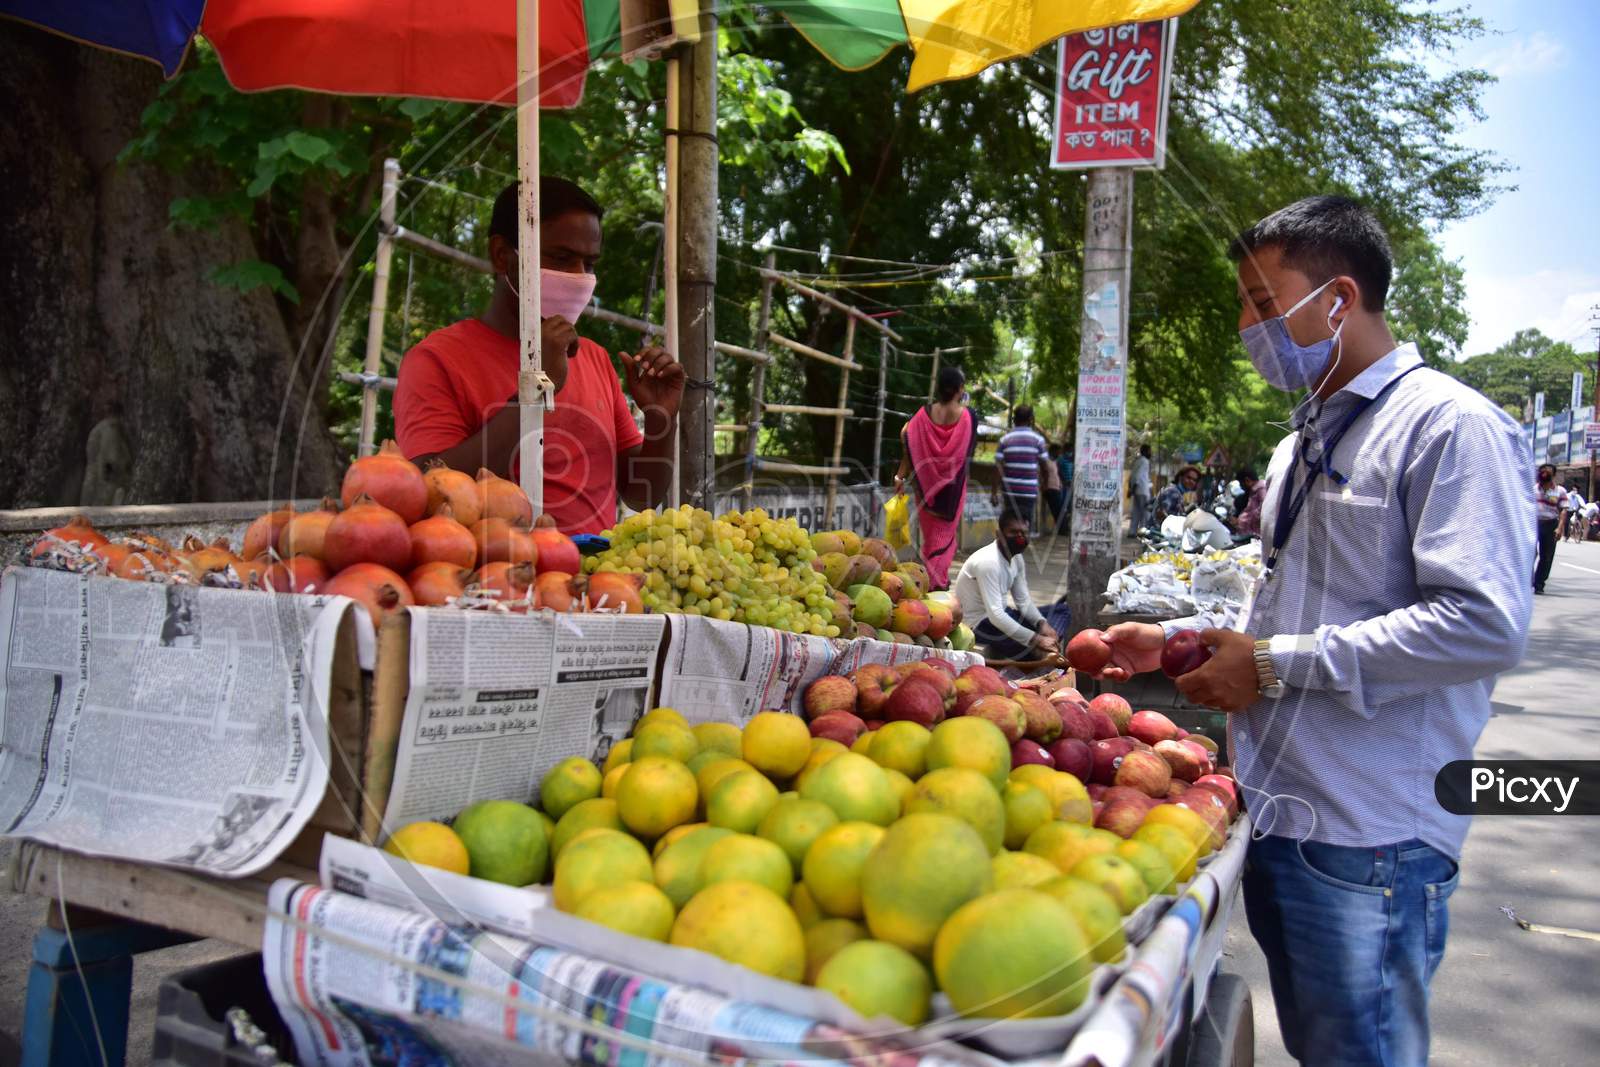 A Vendor sells Fruits  After Authorities Allowed Sale  With Certain Restrictions, During The Ongoing Covid-19 Or Coronavirus  Nationwide Lockdown In Nagaon District Of Assam On May 04,2020